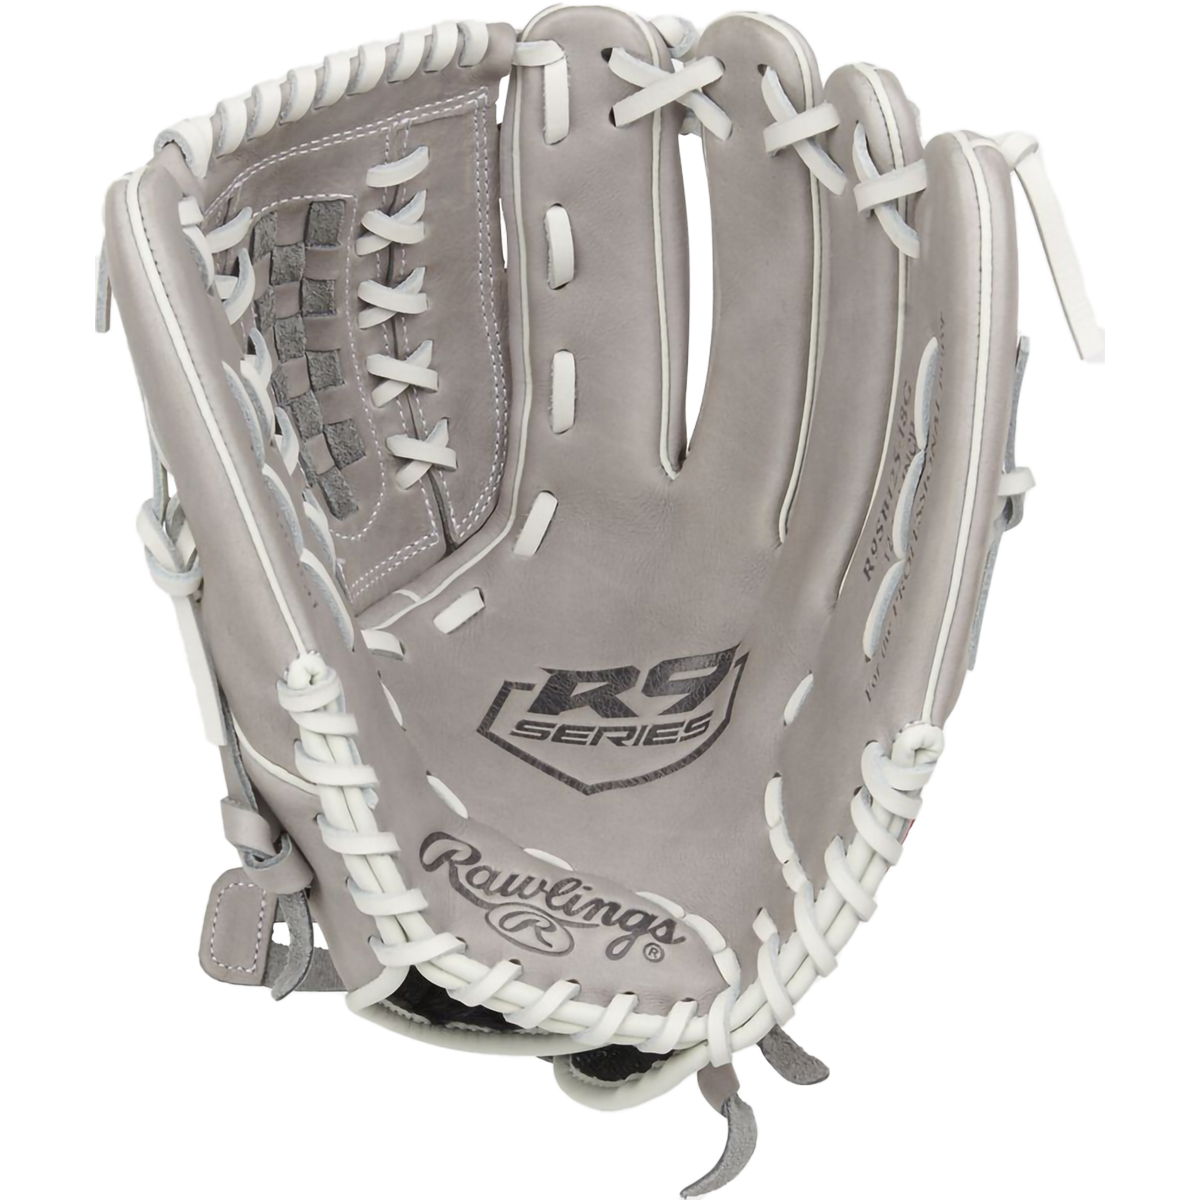 R9 Series Fastpitch Pitcher/Outfield - 12.5